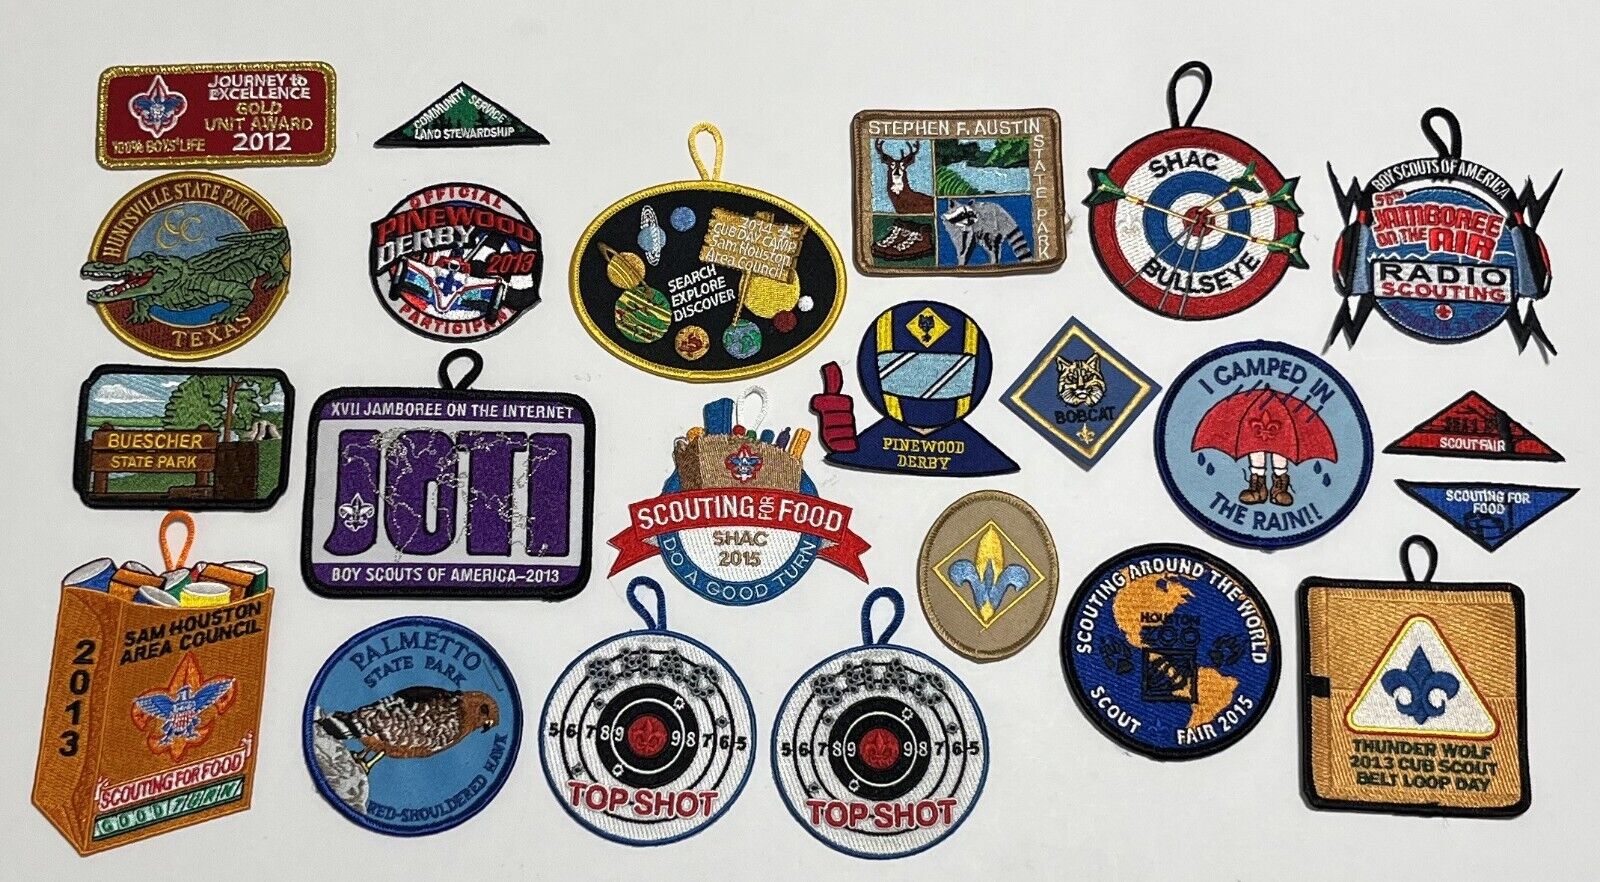 BOY SCOUT of AMERICA Cub Patches Belt Loops Mixed Assortment Lot of 82 Pieces